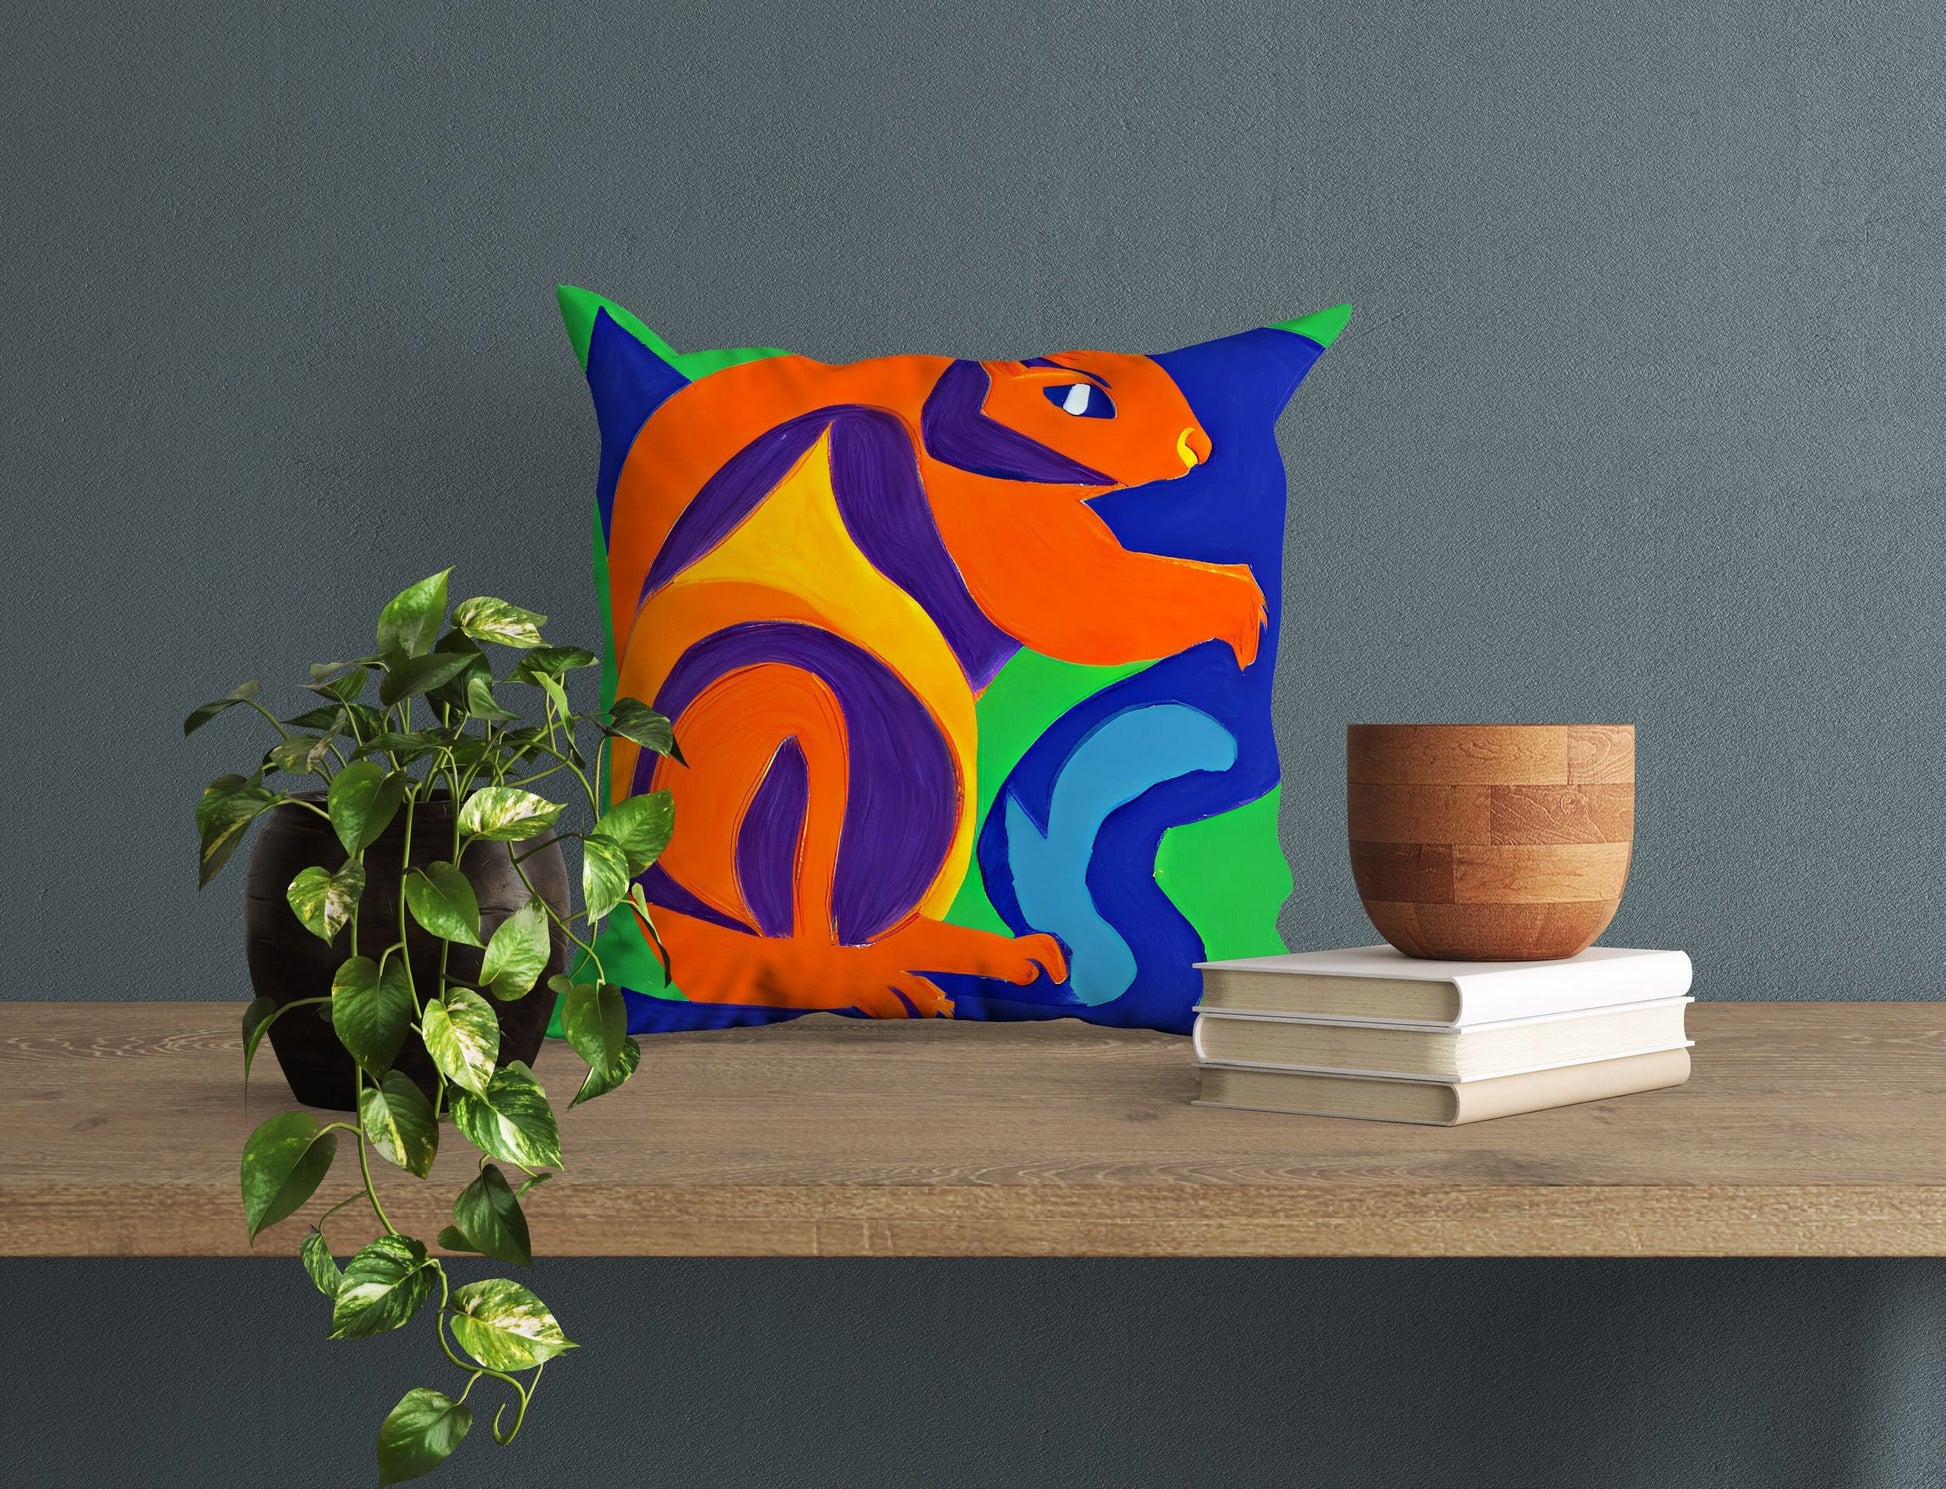 Squirrel, Decorative Pillow, Abstract Throw Pillow Cover, Artist Pillow, Colorful Pillow Case, Beautiful Pillow, Large Pillow Cases